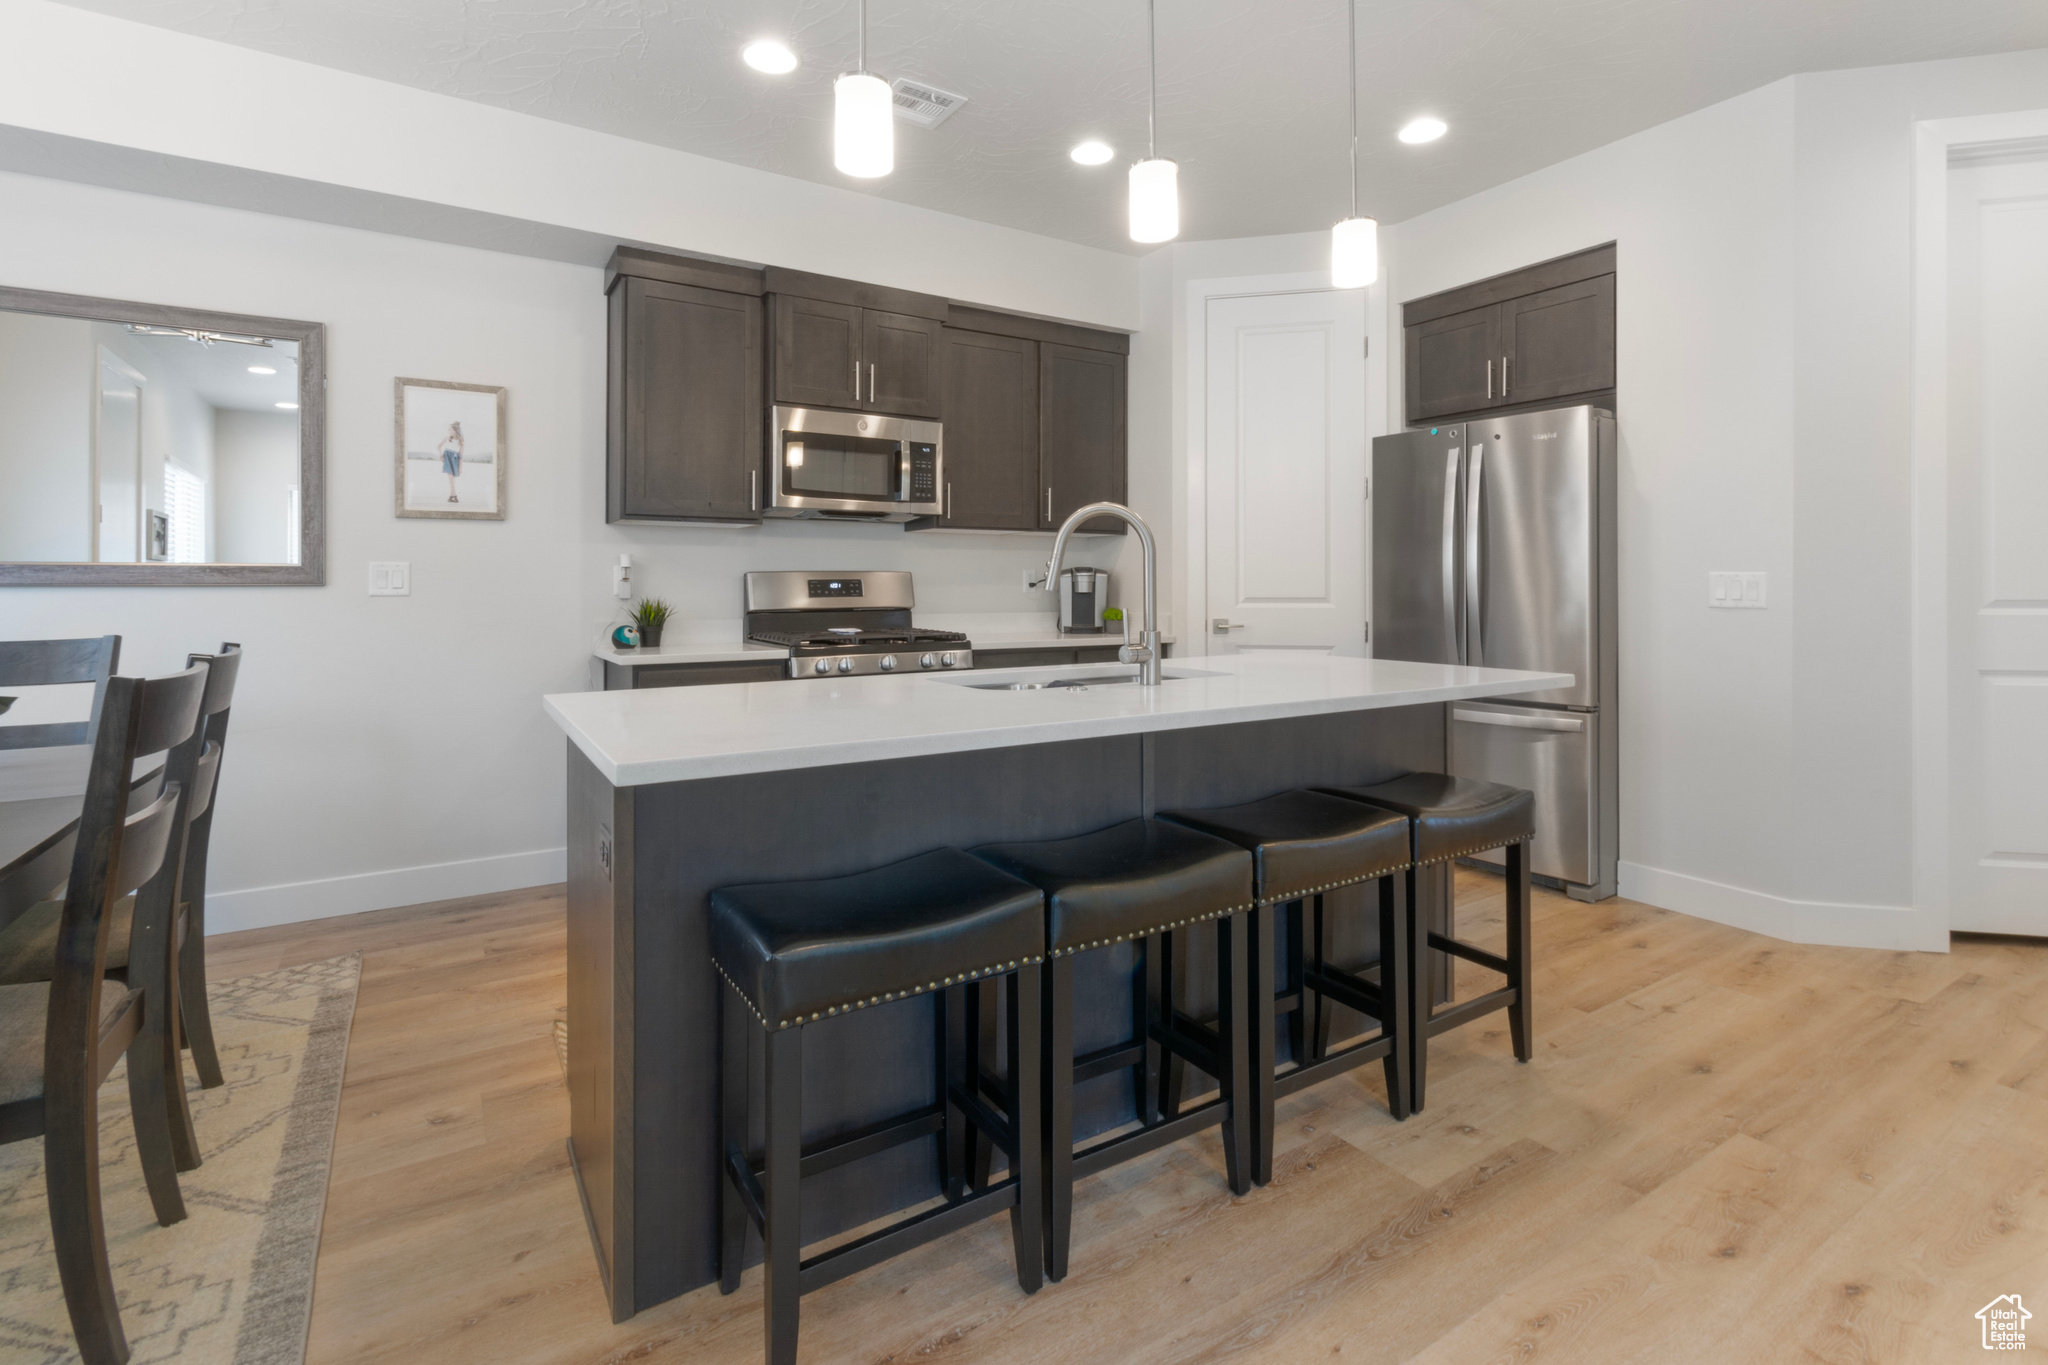 Kitchen featuring light hardwood / wood-style flooring, stainless steel appliances, dark brown cabinets, sink, and pendant lighting